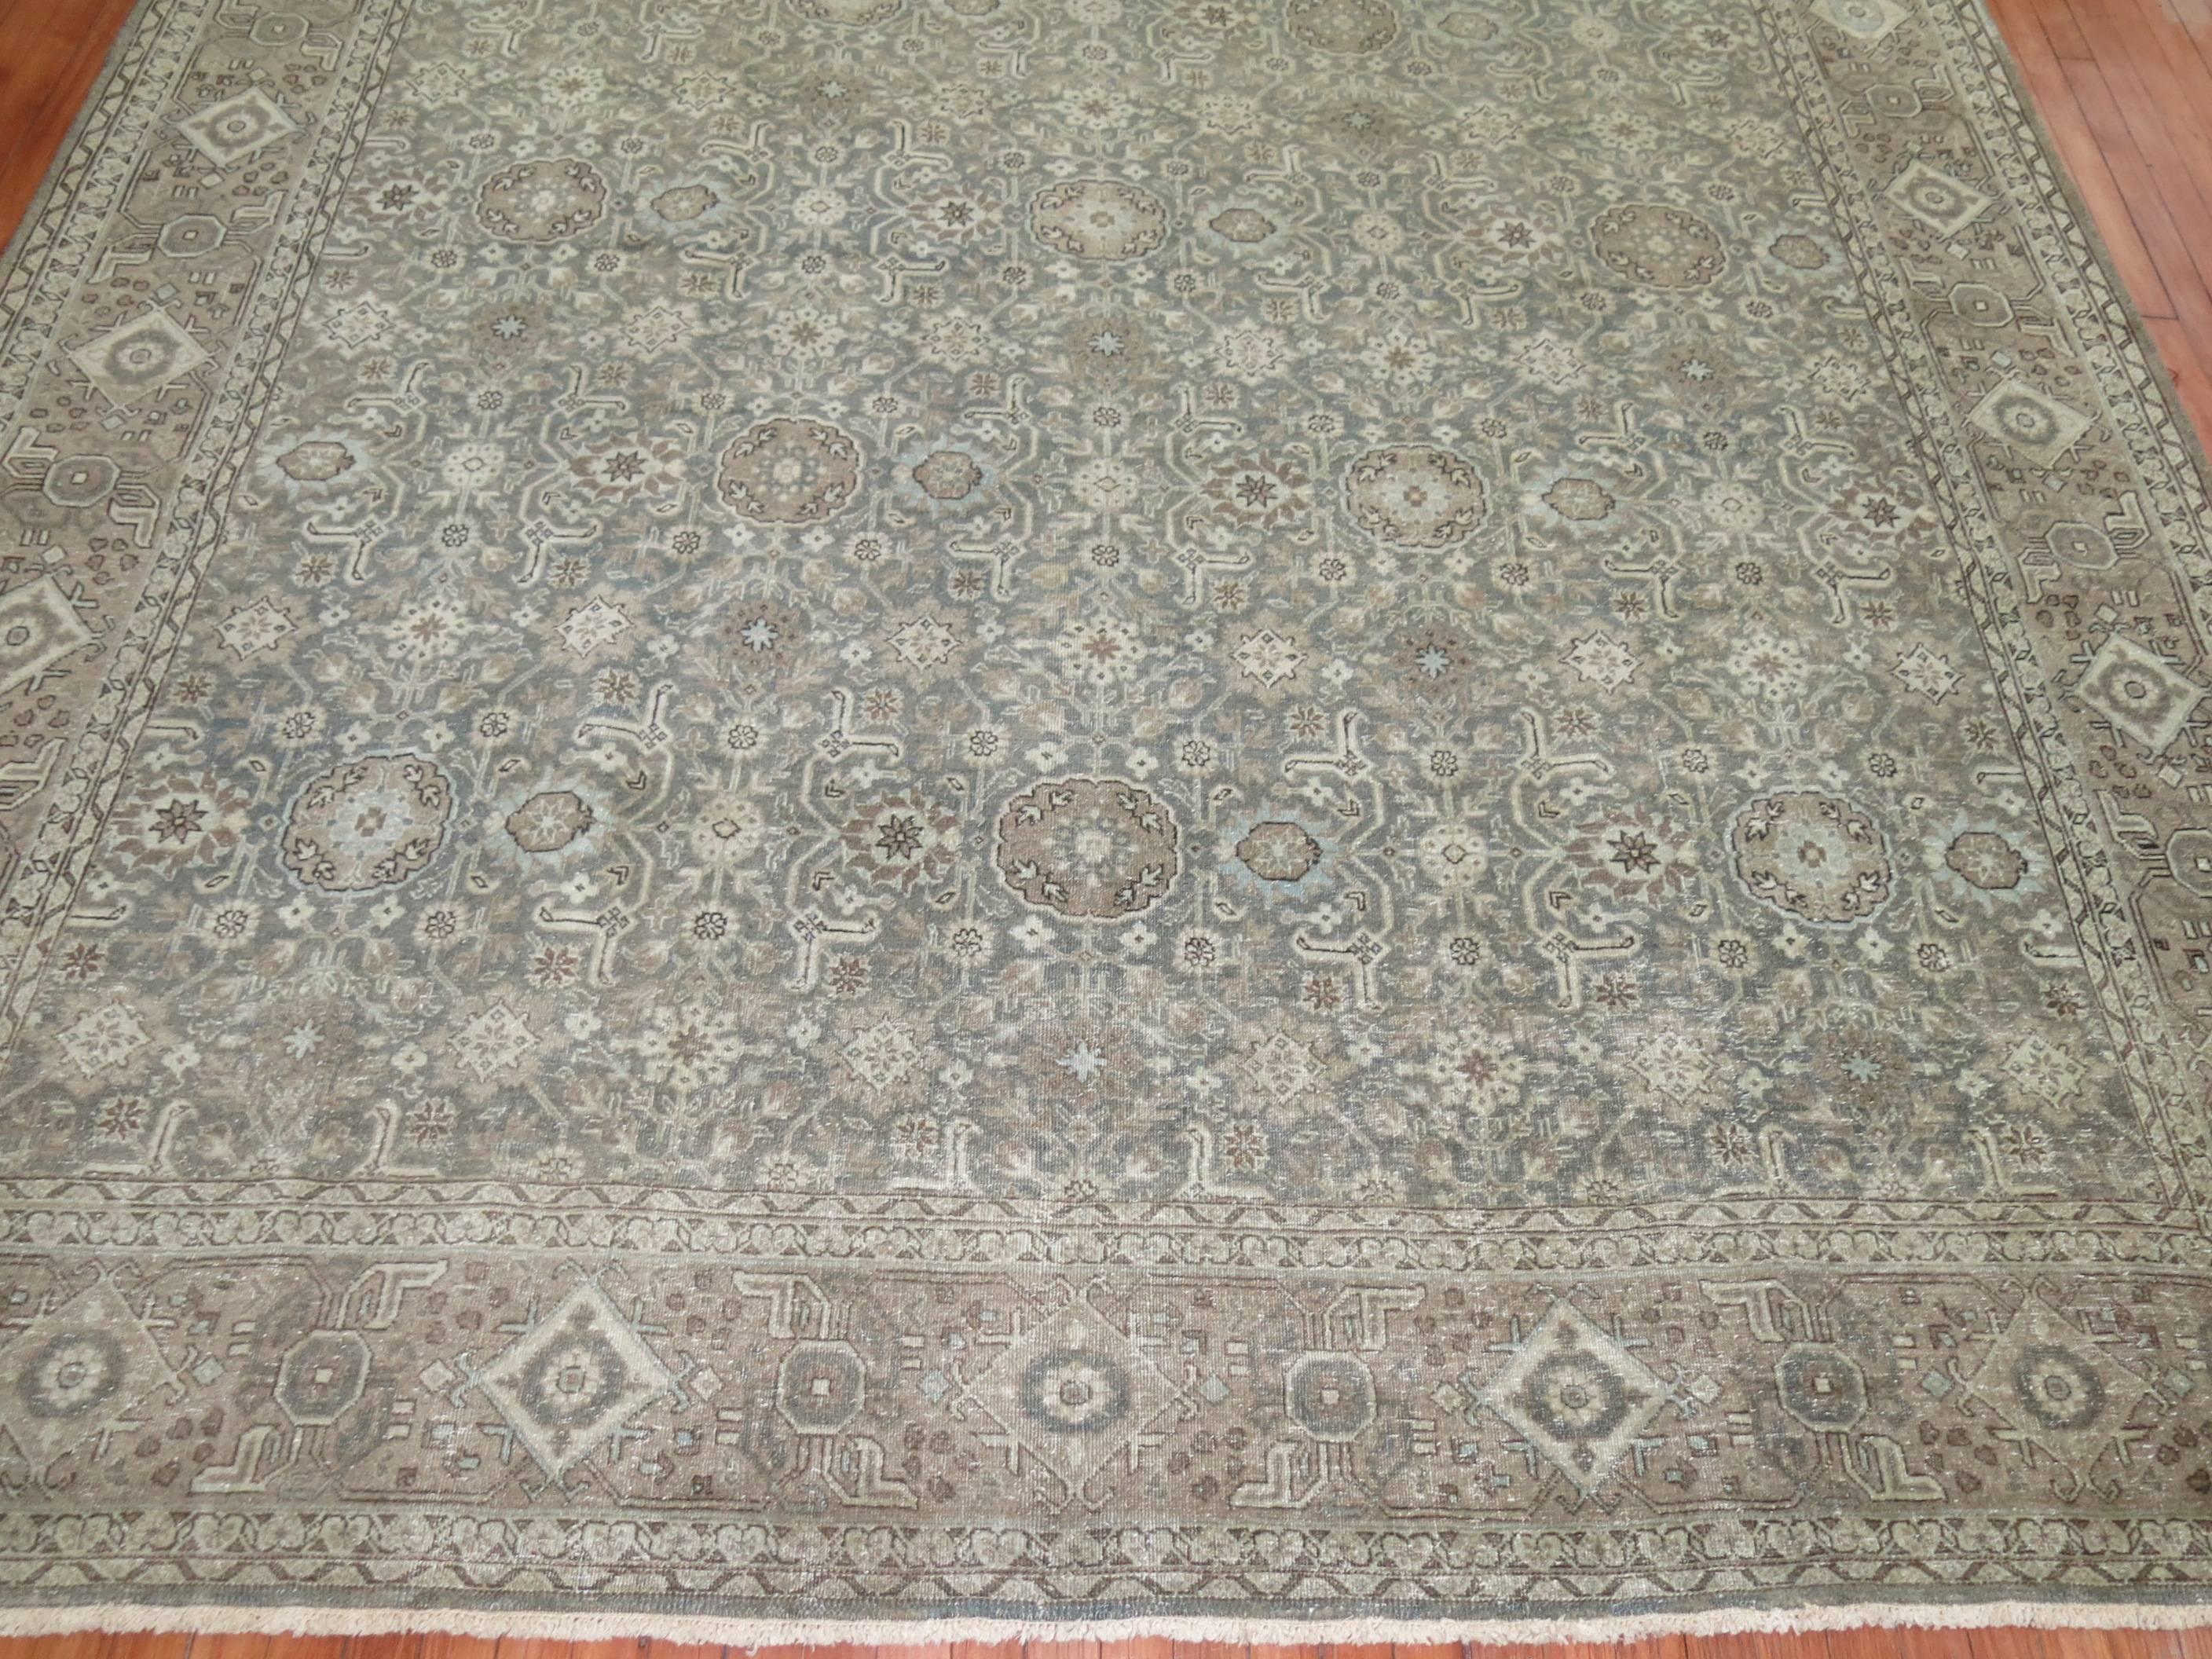 Antique Persian Tabriz rug in silver, green blue and brown hues.

Measures: 9' x 12'8''.